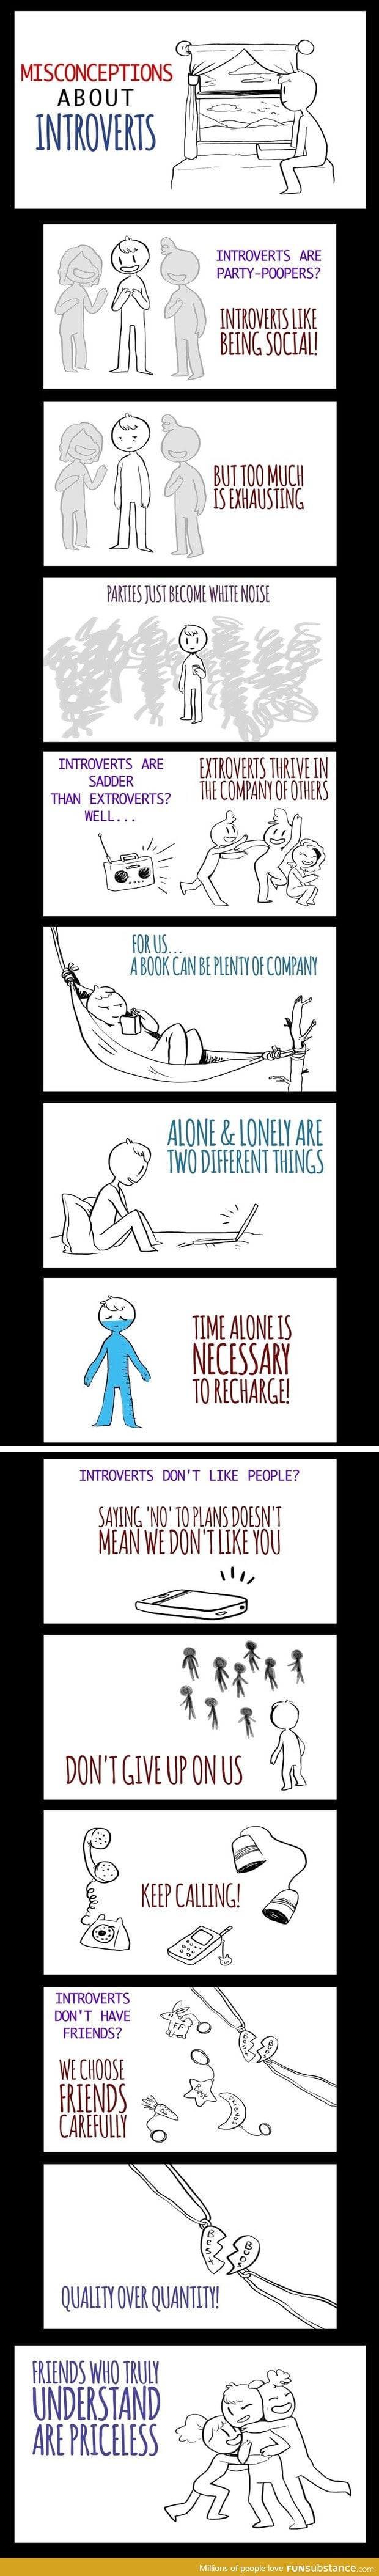 Misconceptions about introverts